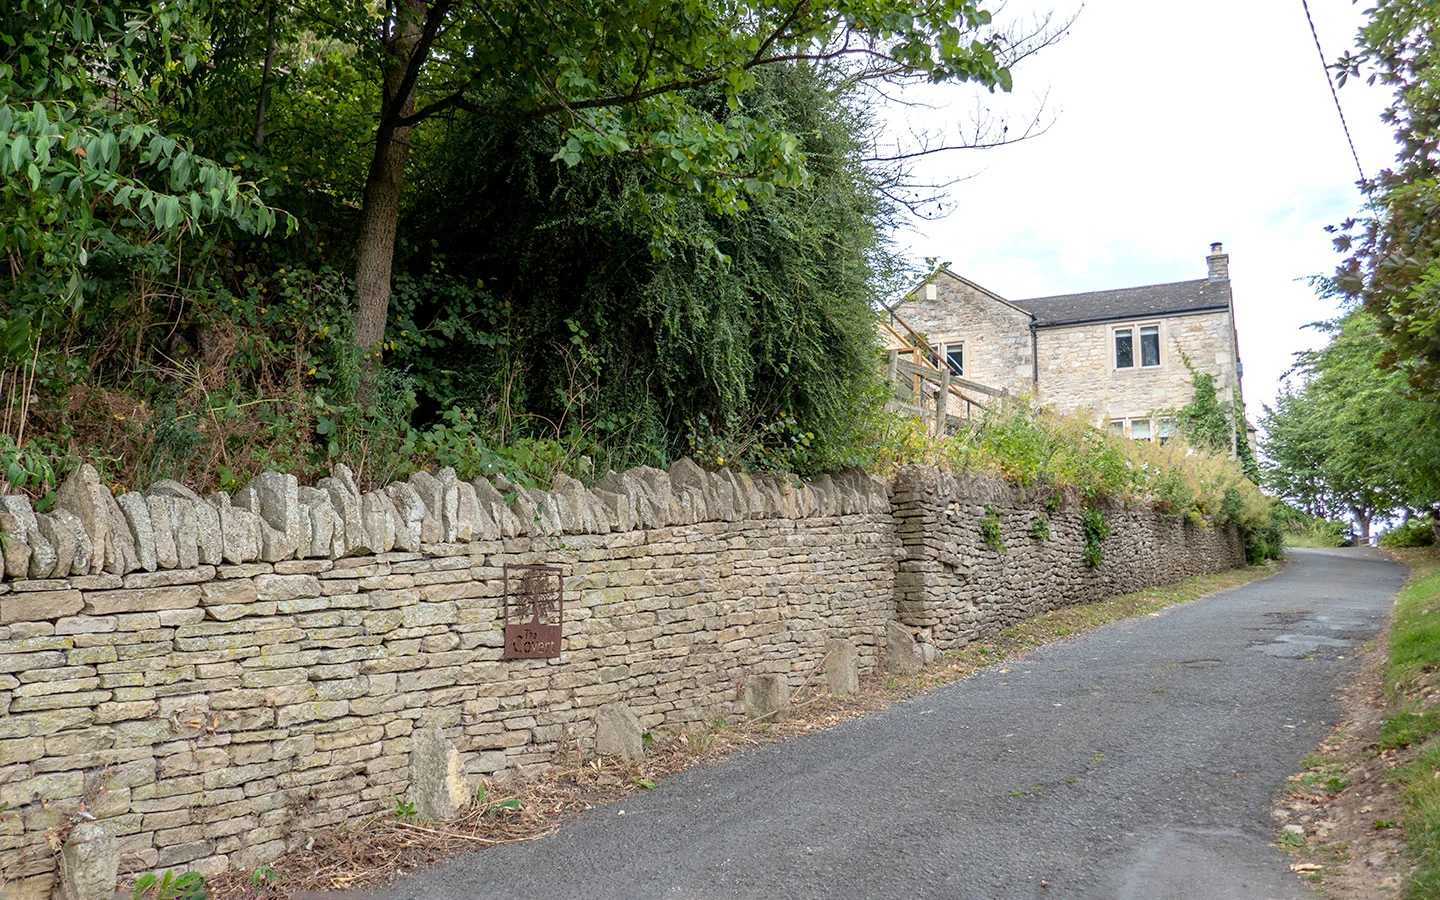 The Covert house with stone wall in Slad